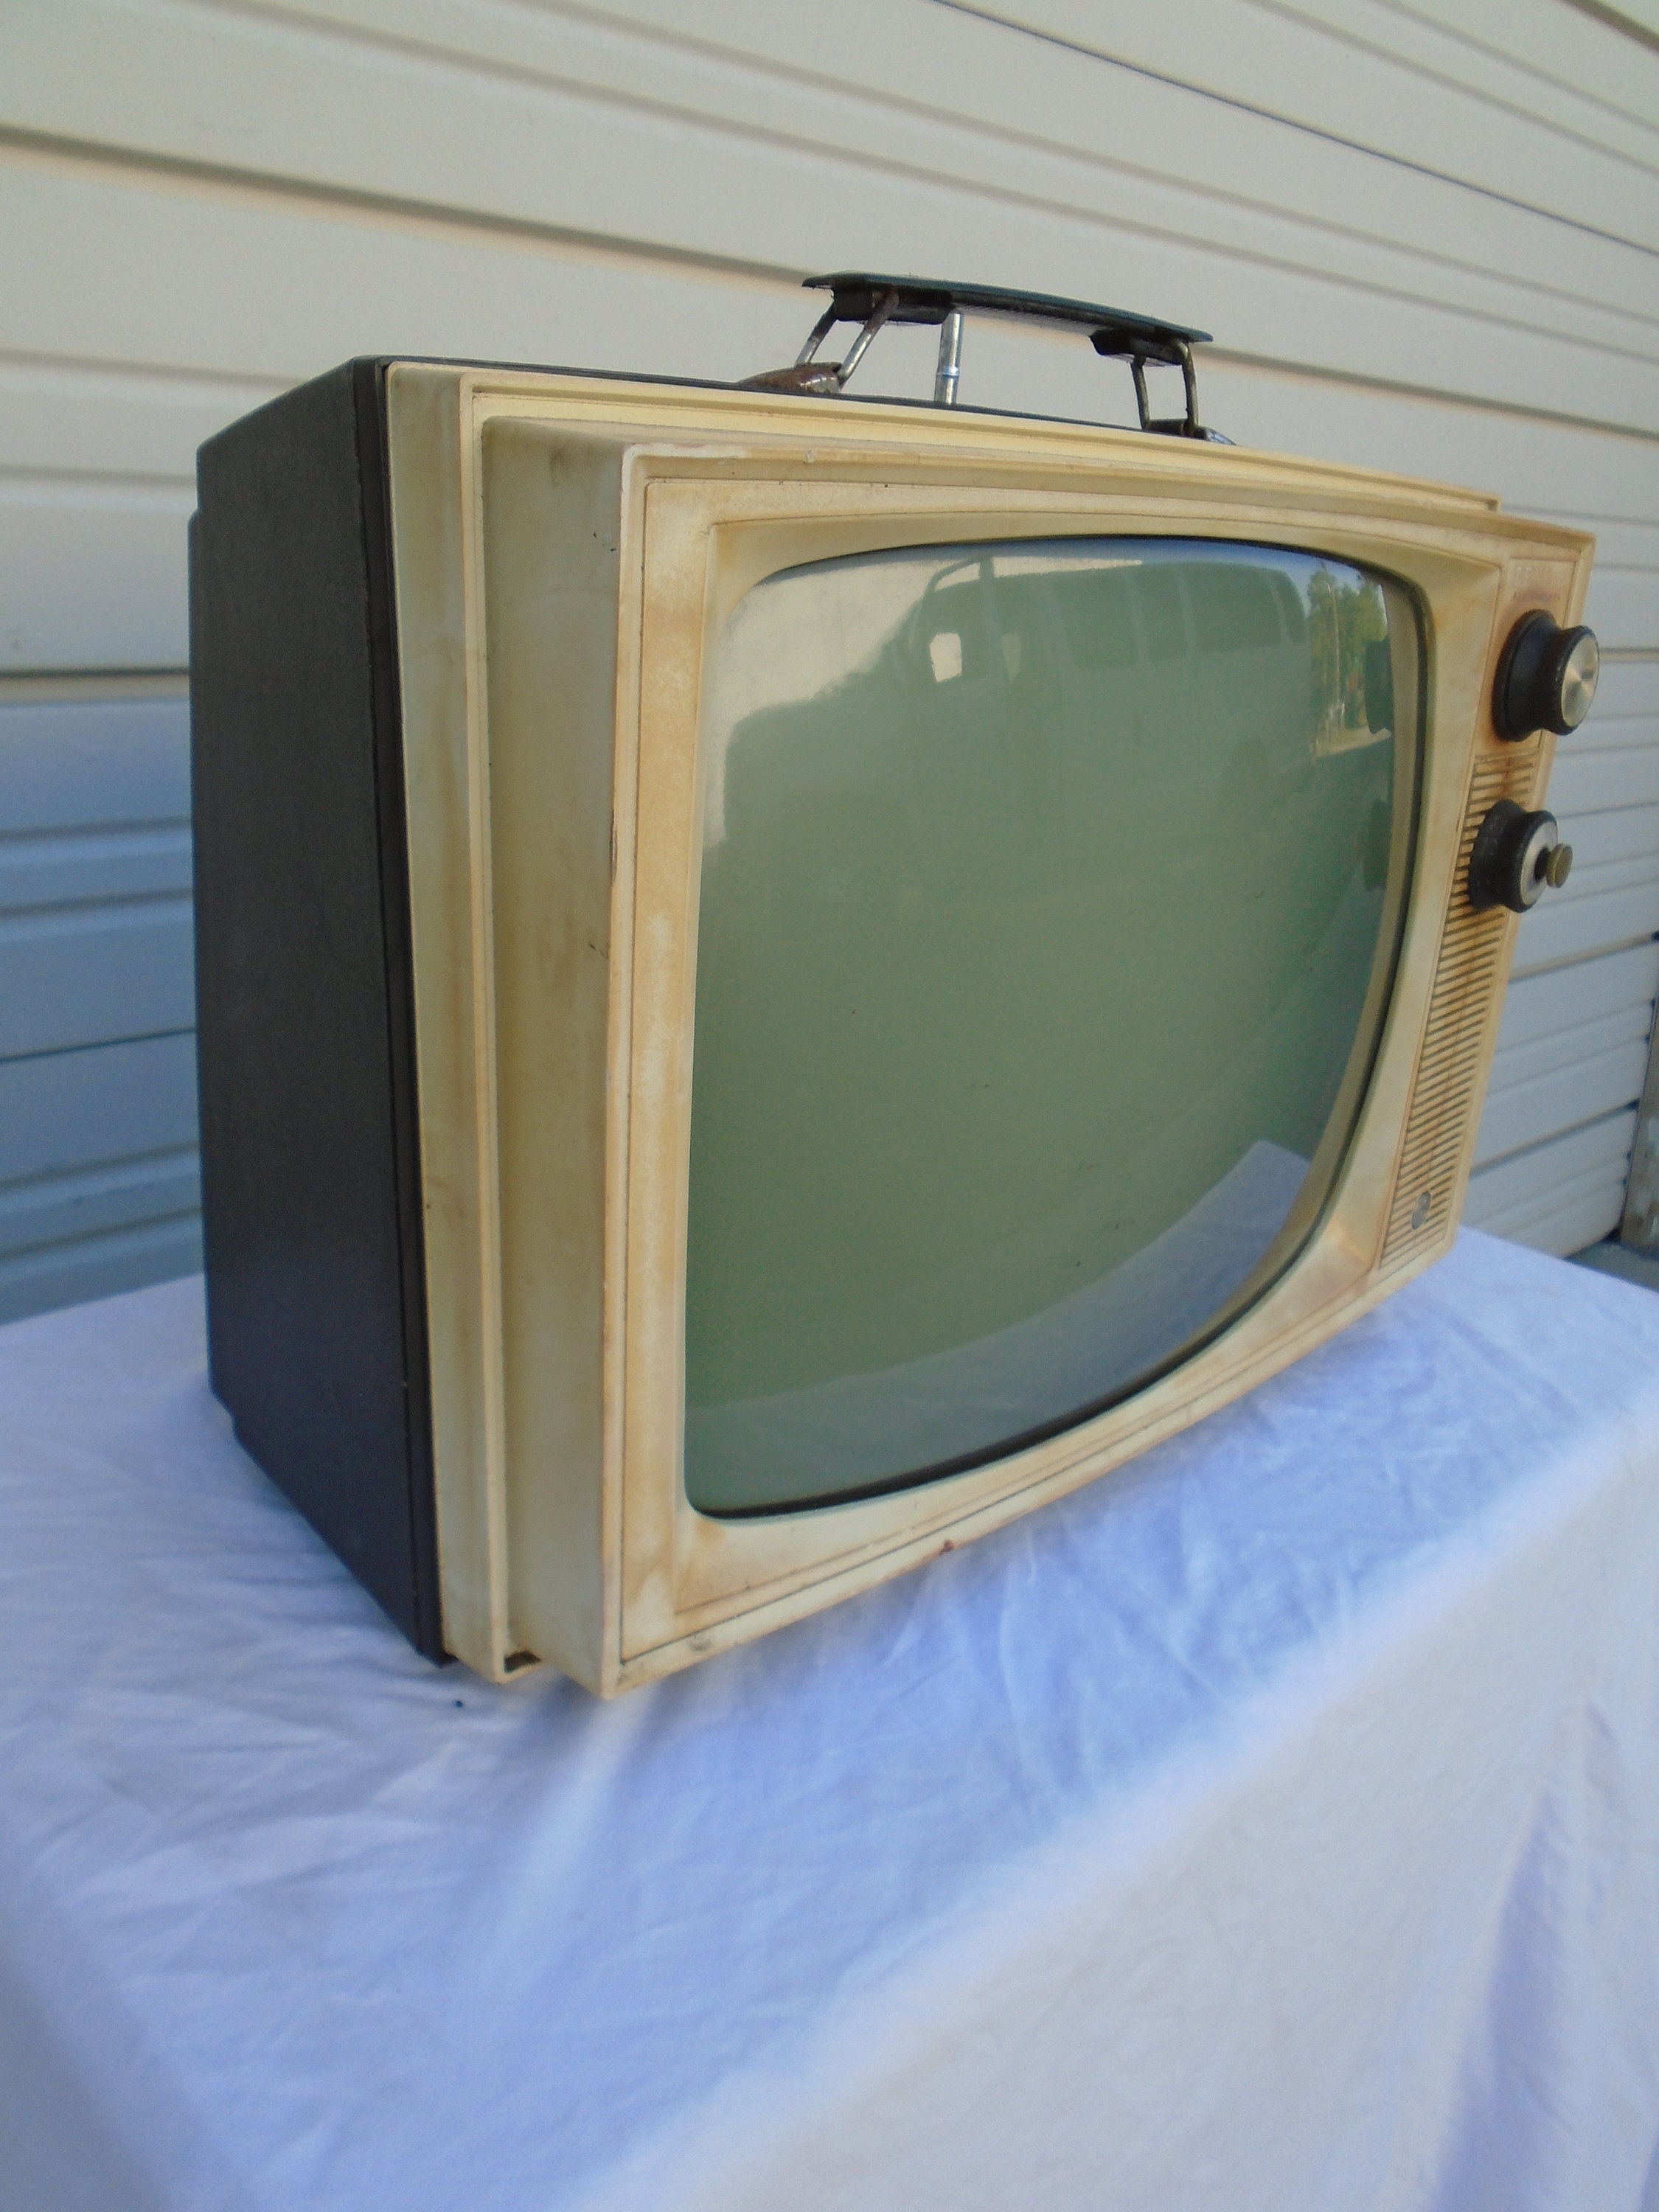 Vintage extra mini television, mini portable ELT8 television made in Germany